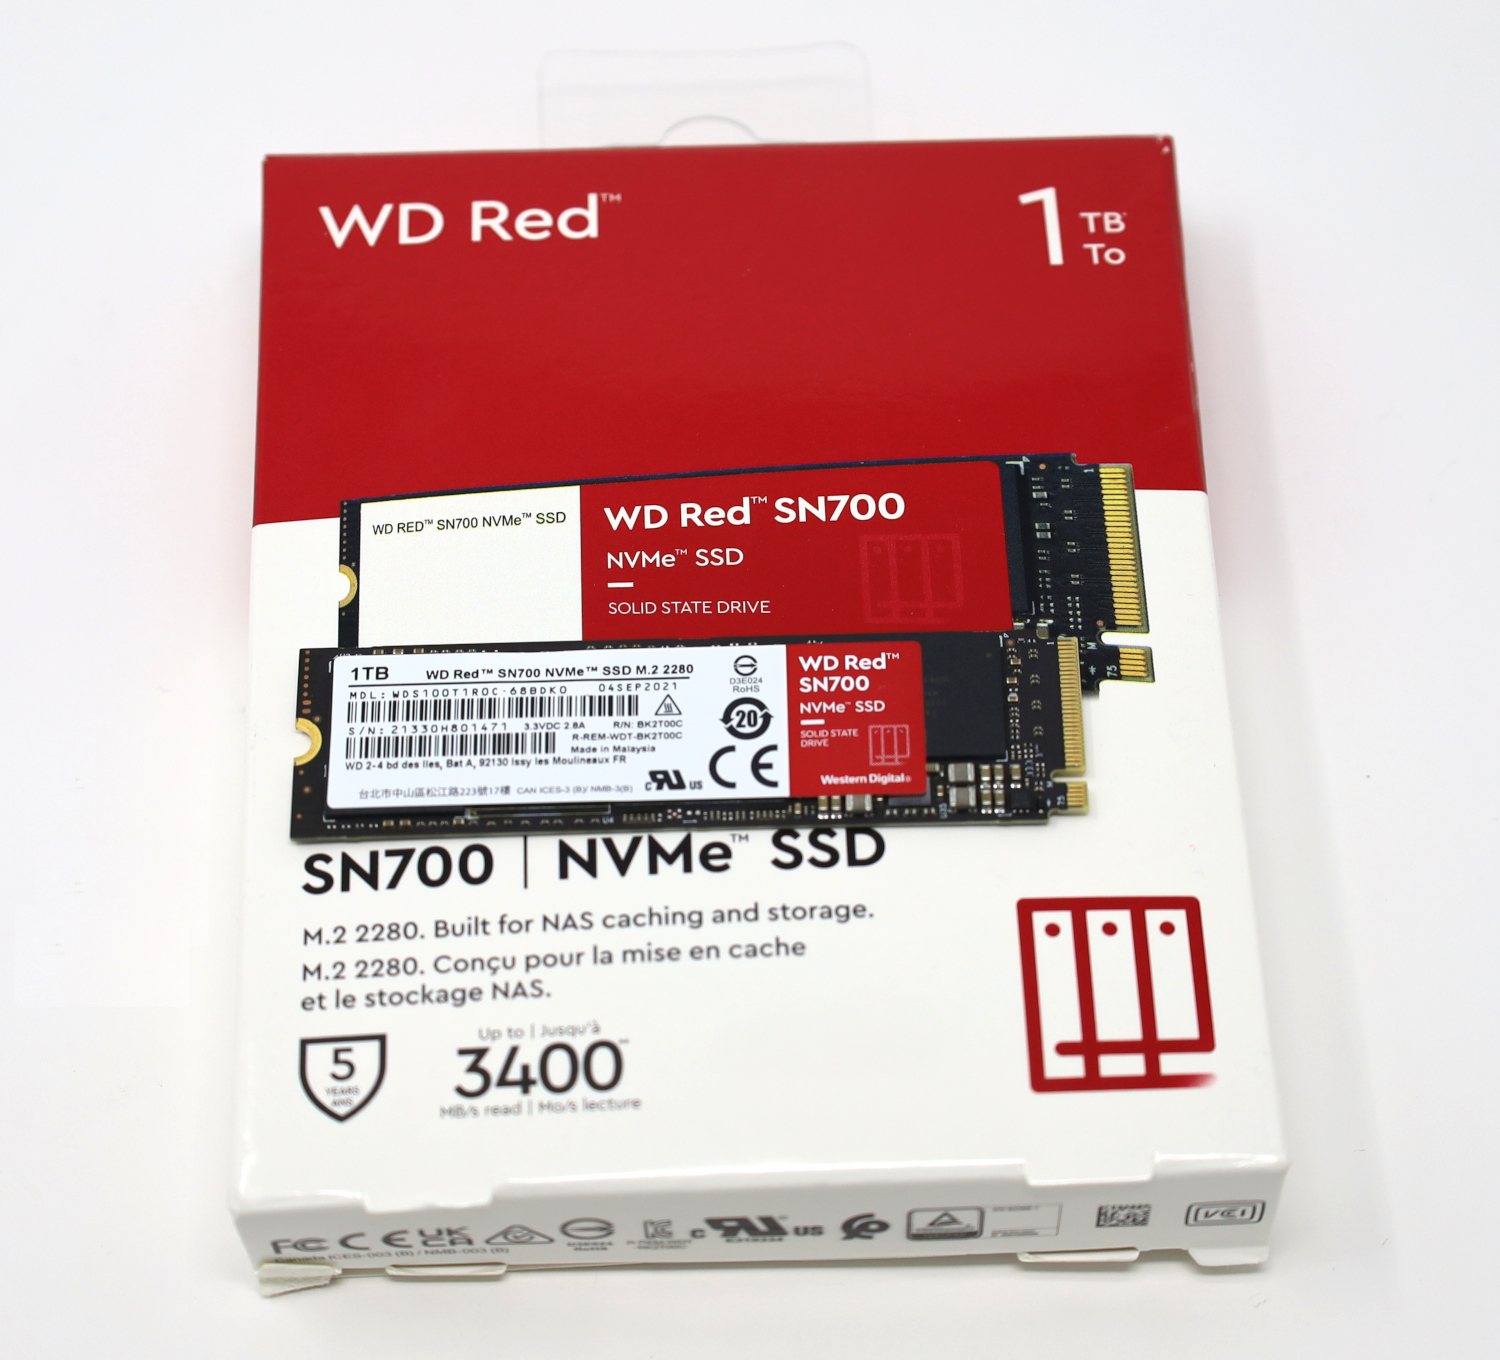 WD Red SN700 1TB NVMe SSD Review